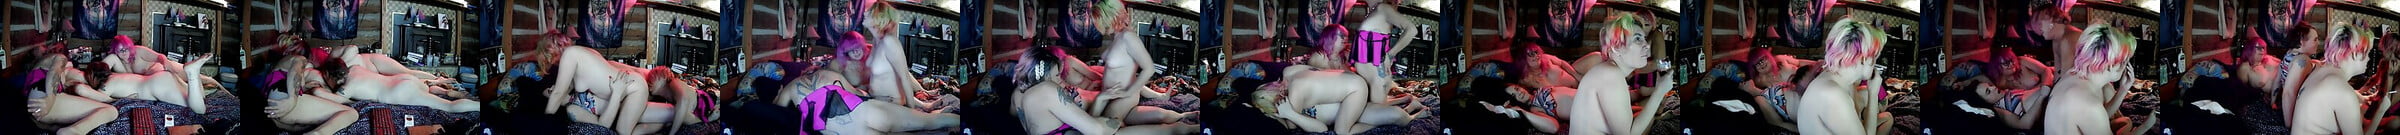 Transbian 5way Orgy W 3 Trannys And Cis Couple Goth Kink Xhamster